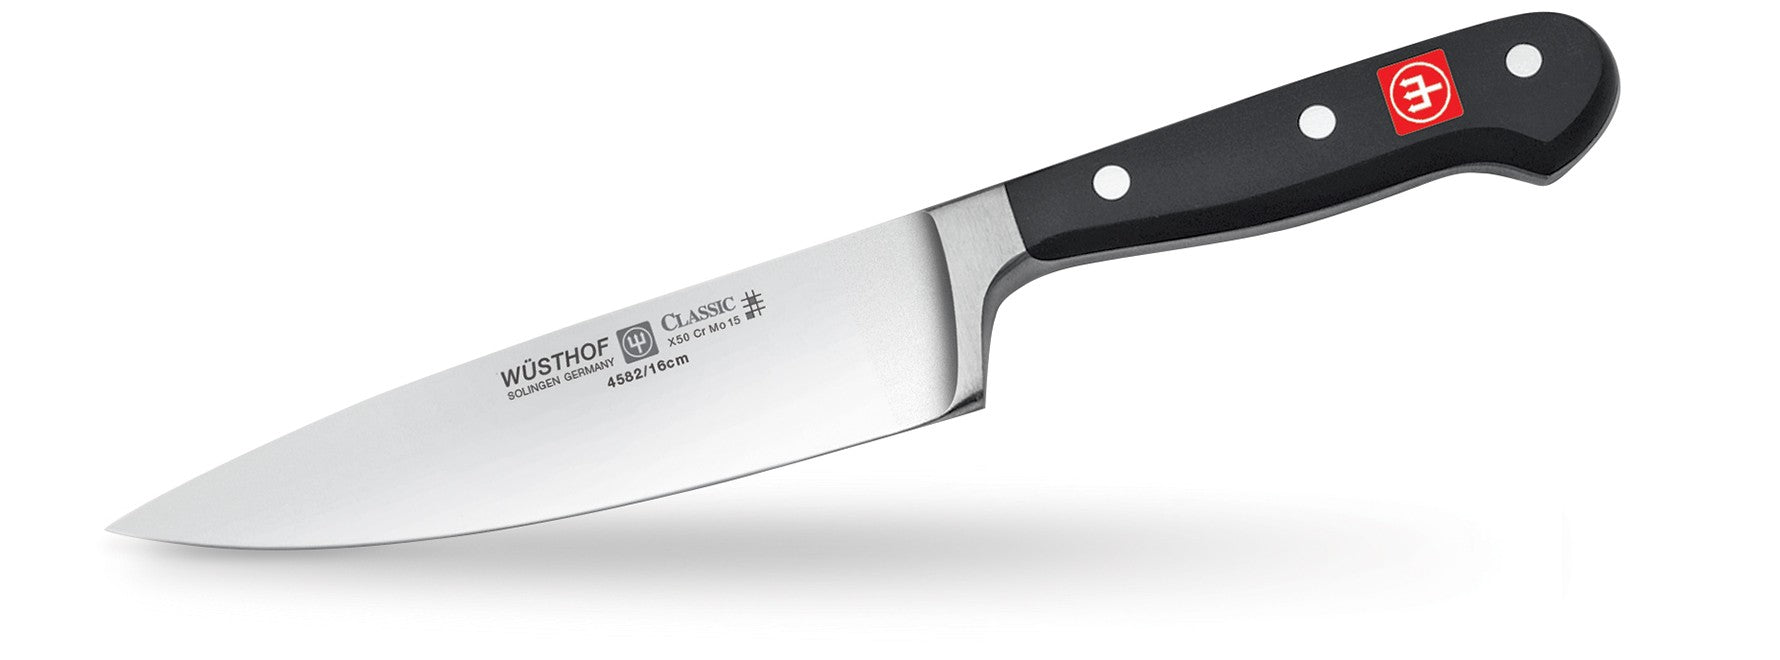 Wusthof CLASSIC 6 Inch Cook's Knife